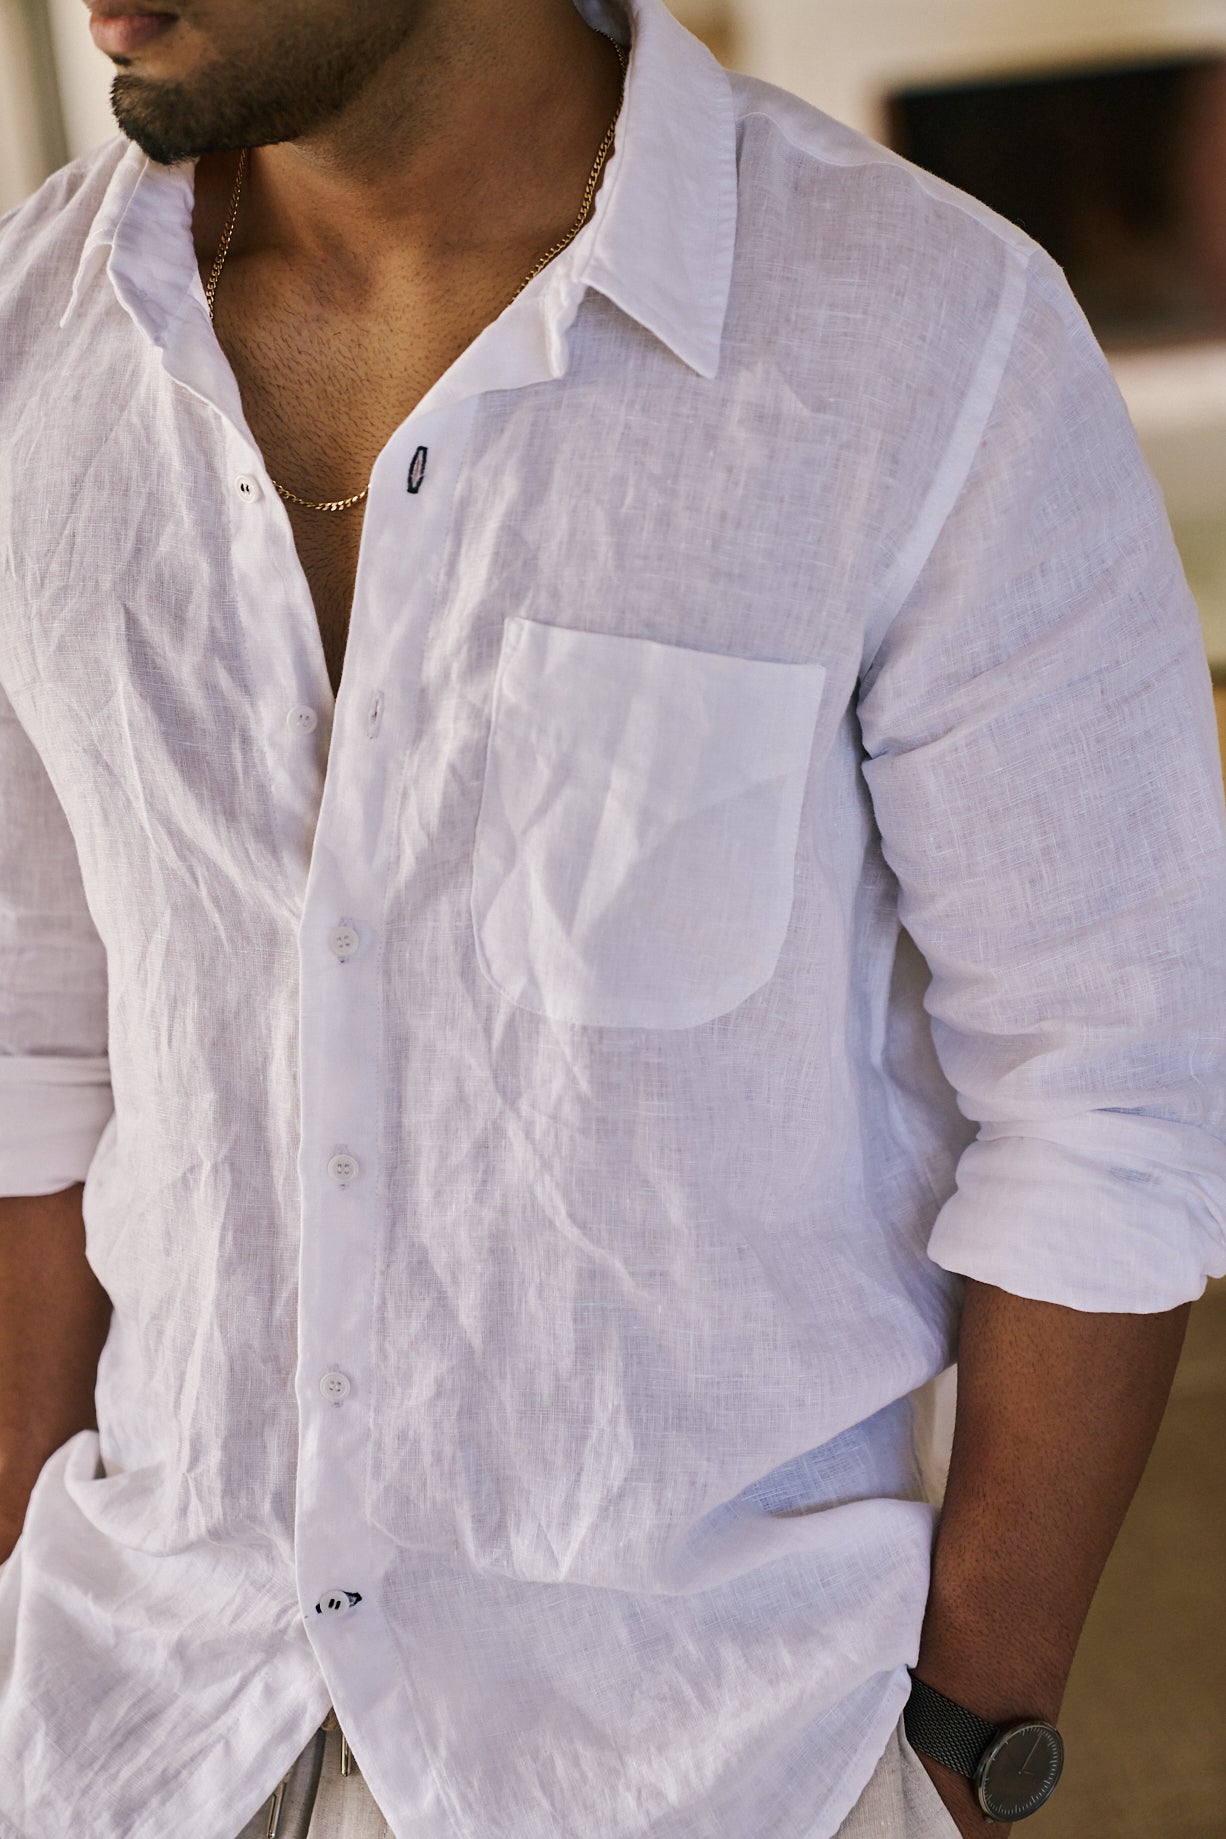 Men's linen shirt in white online in Hong Kong and Singapore